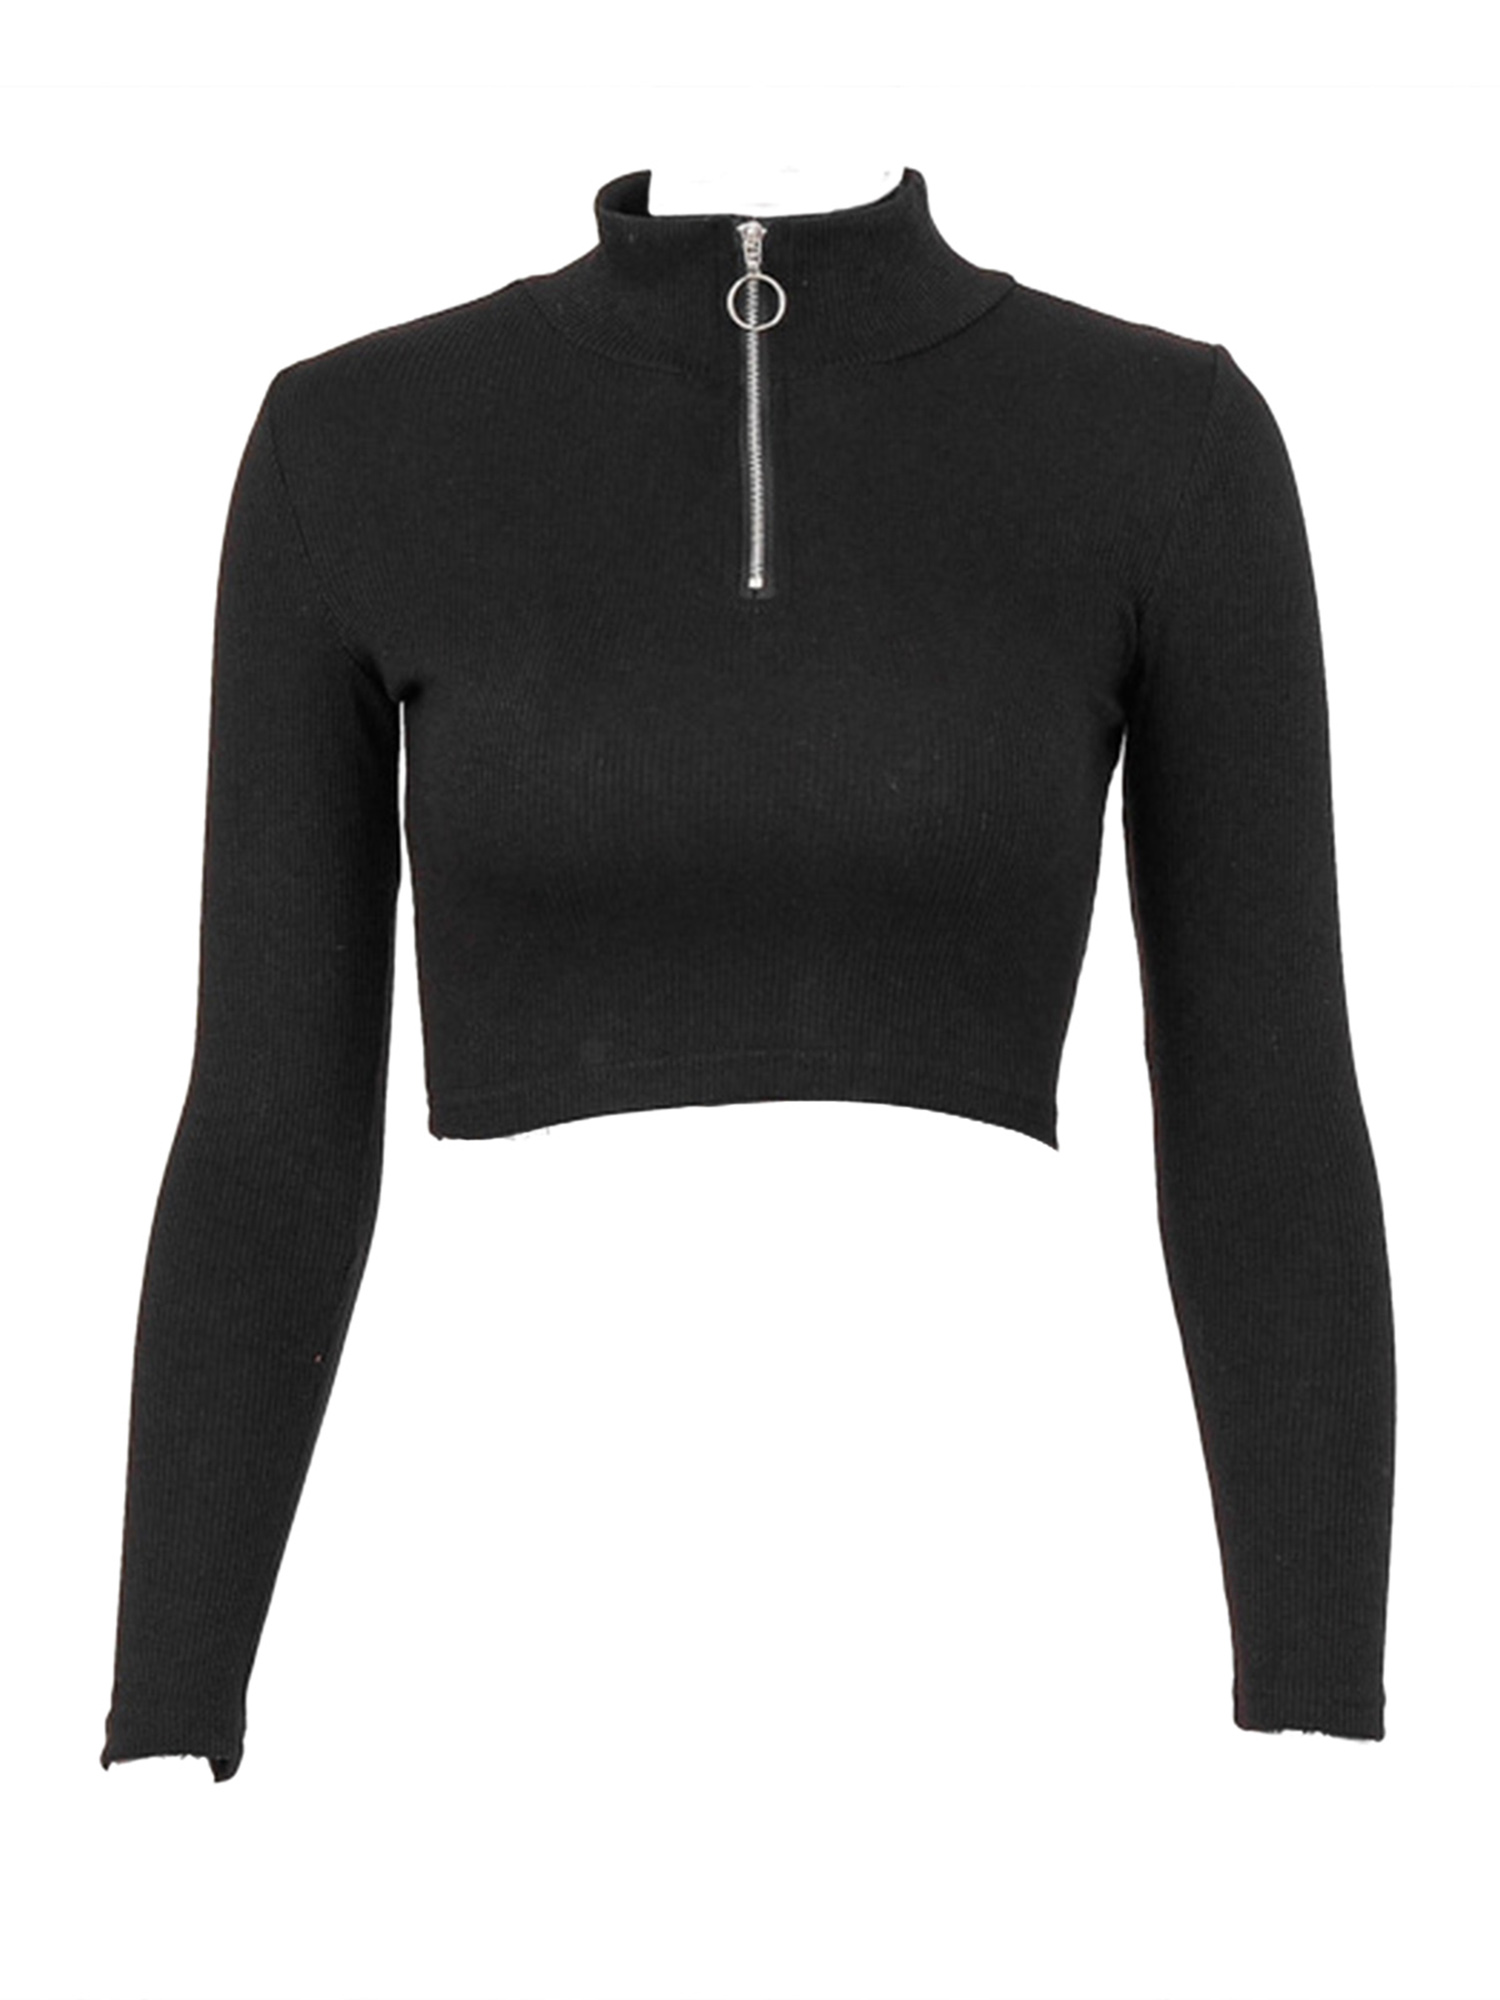 ✿☌☌Women´s Rib Knit Crop Top Long Sleeve Stand Collar Zipper Front Slim Fit Solid Color Basic Tee Shirt